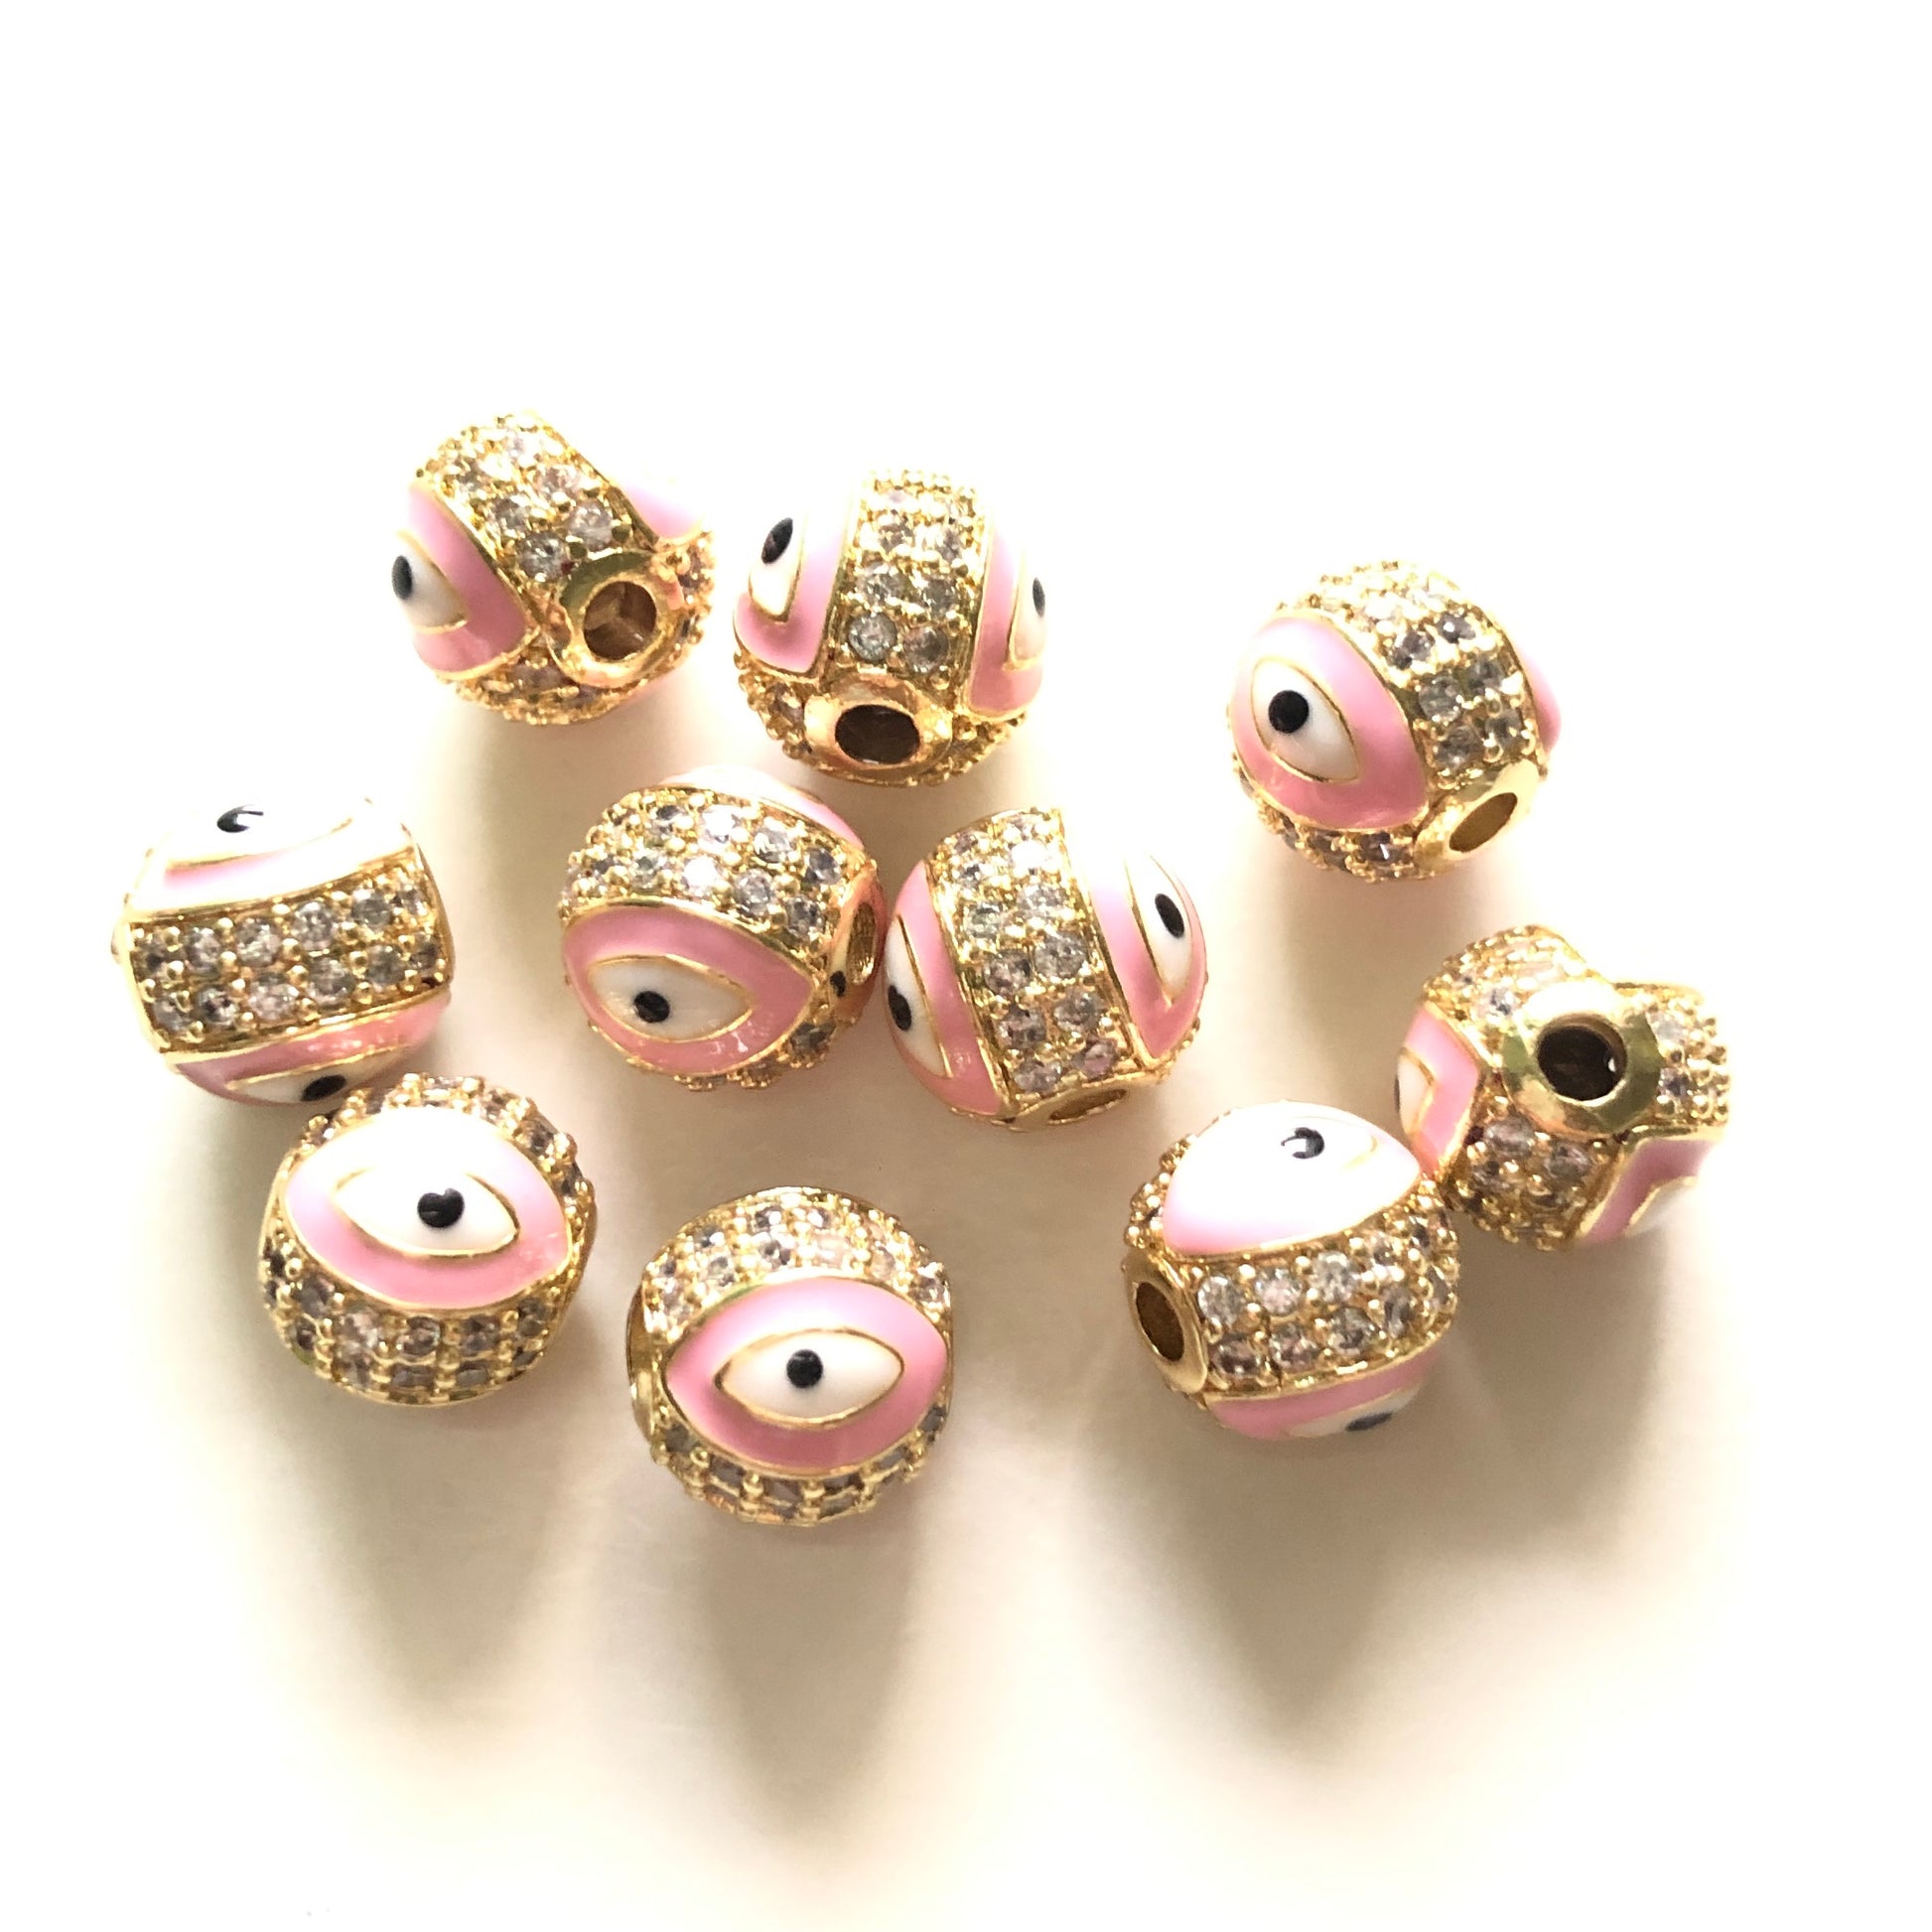 10pcs/lot 10mm CZ Paved Gold Evil Eye Ball Spacers Beads Pink CZ Paved Spacers 10mm Beads Ball Beads New Spacers Arrivals Charms Beads Beyond